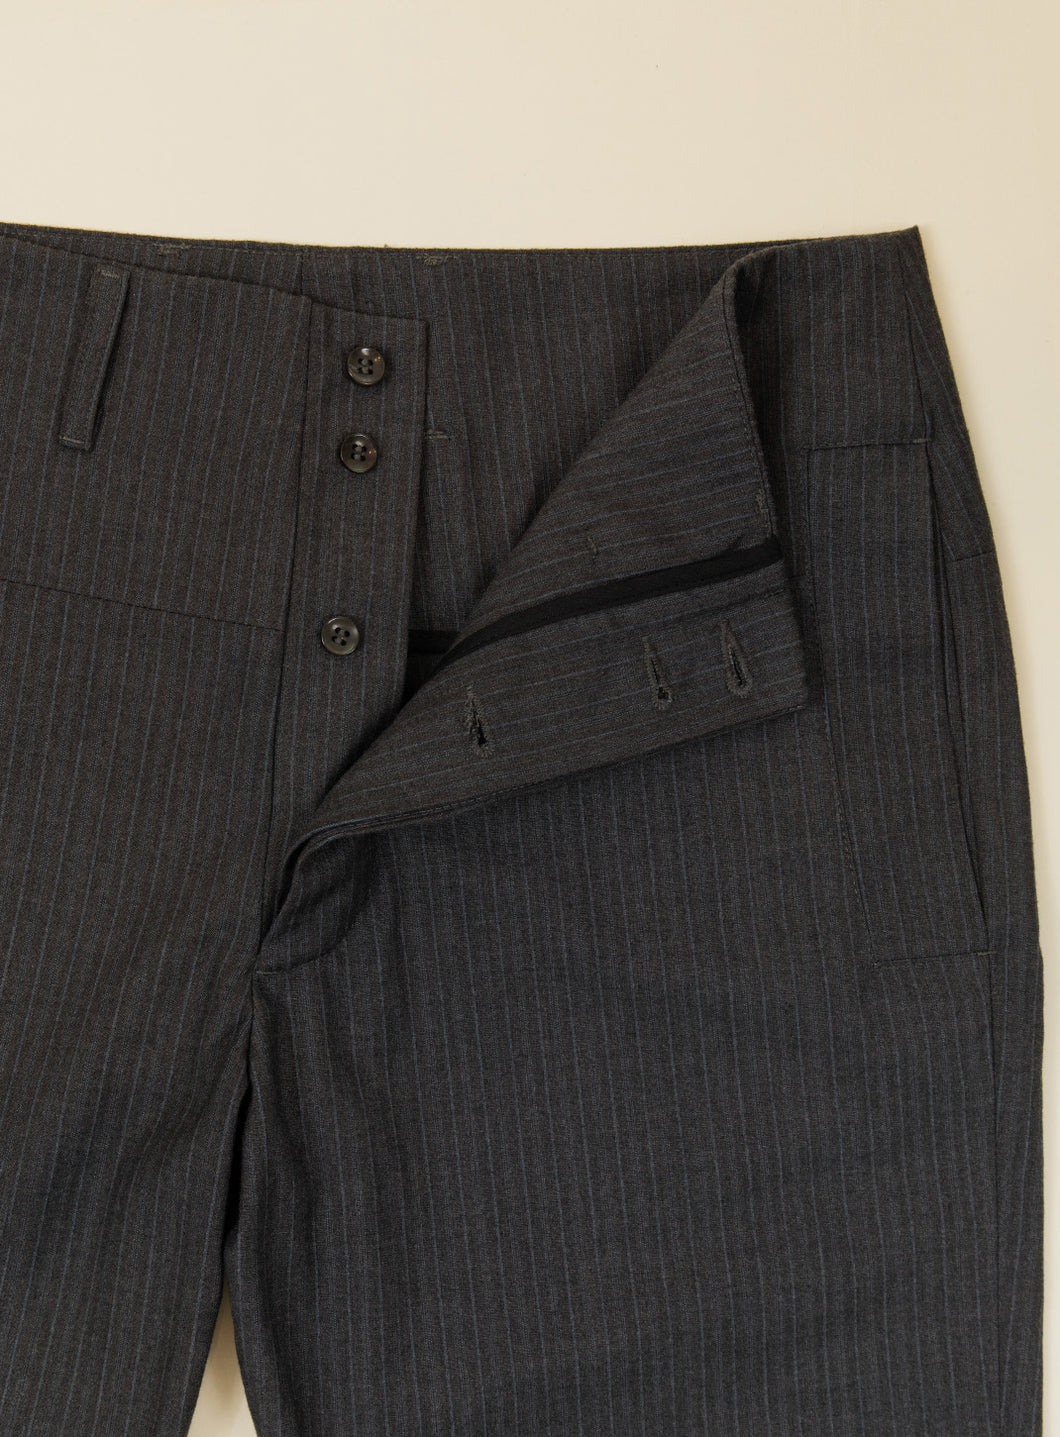 Pants with Large Waist Belt in Graphite Large Stripe Serge Fabric